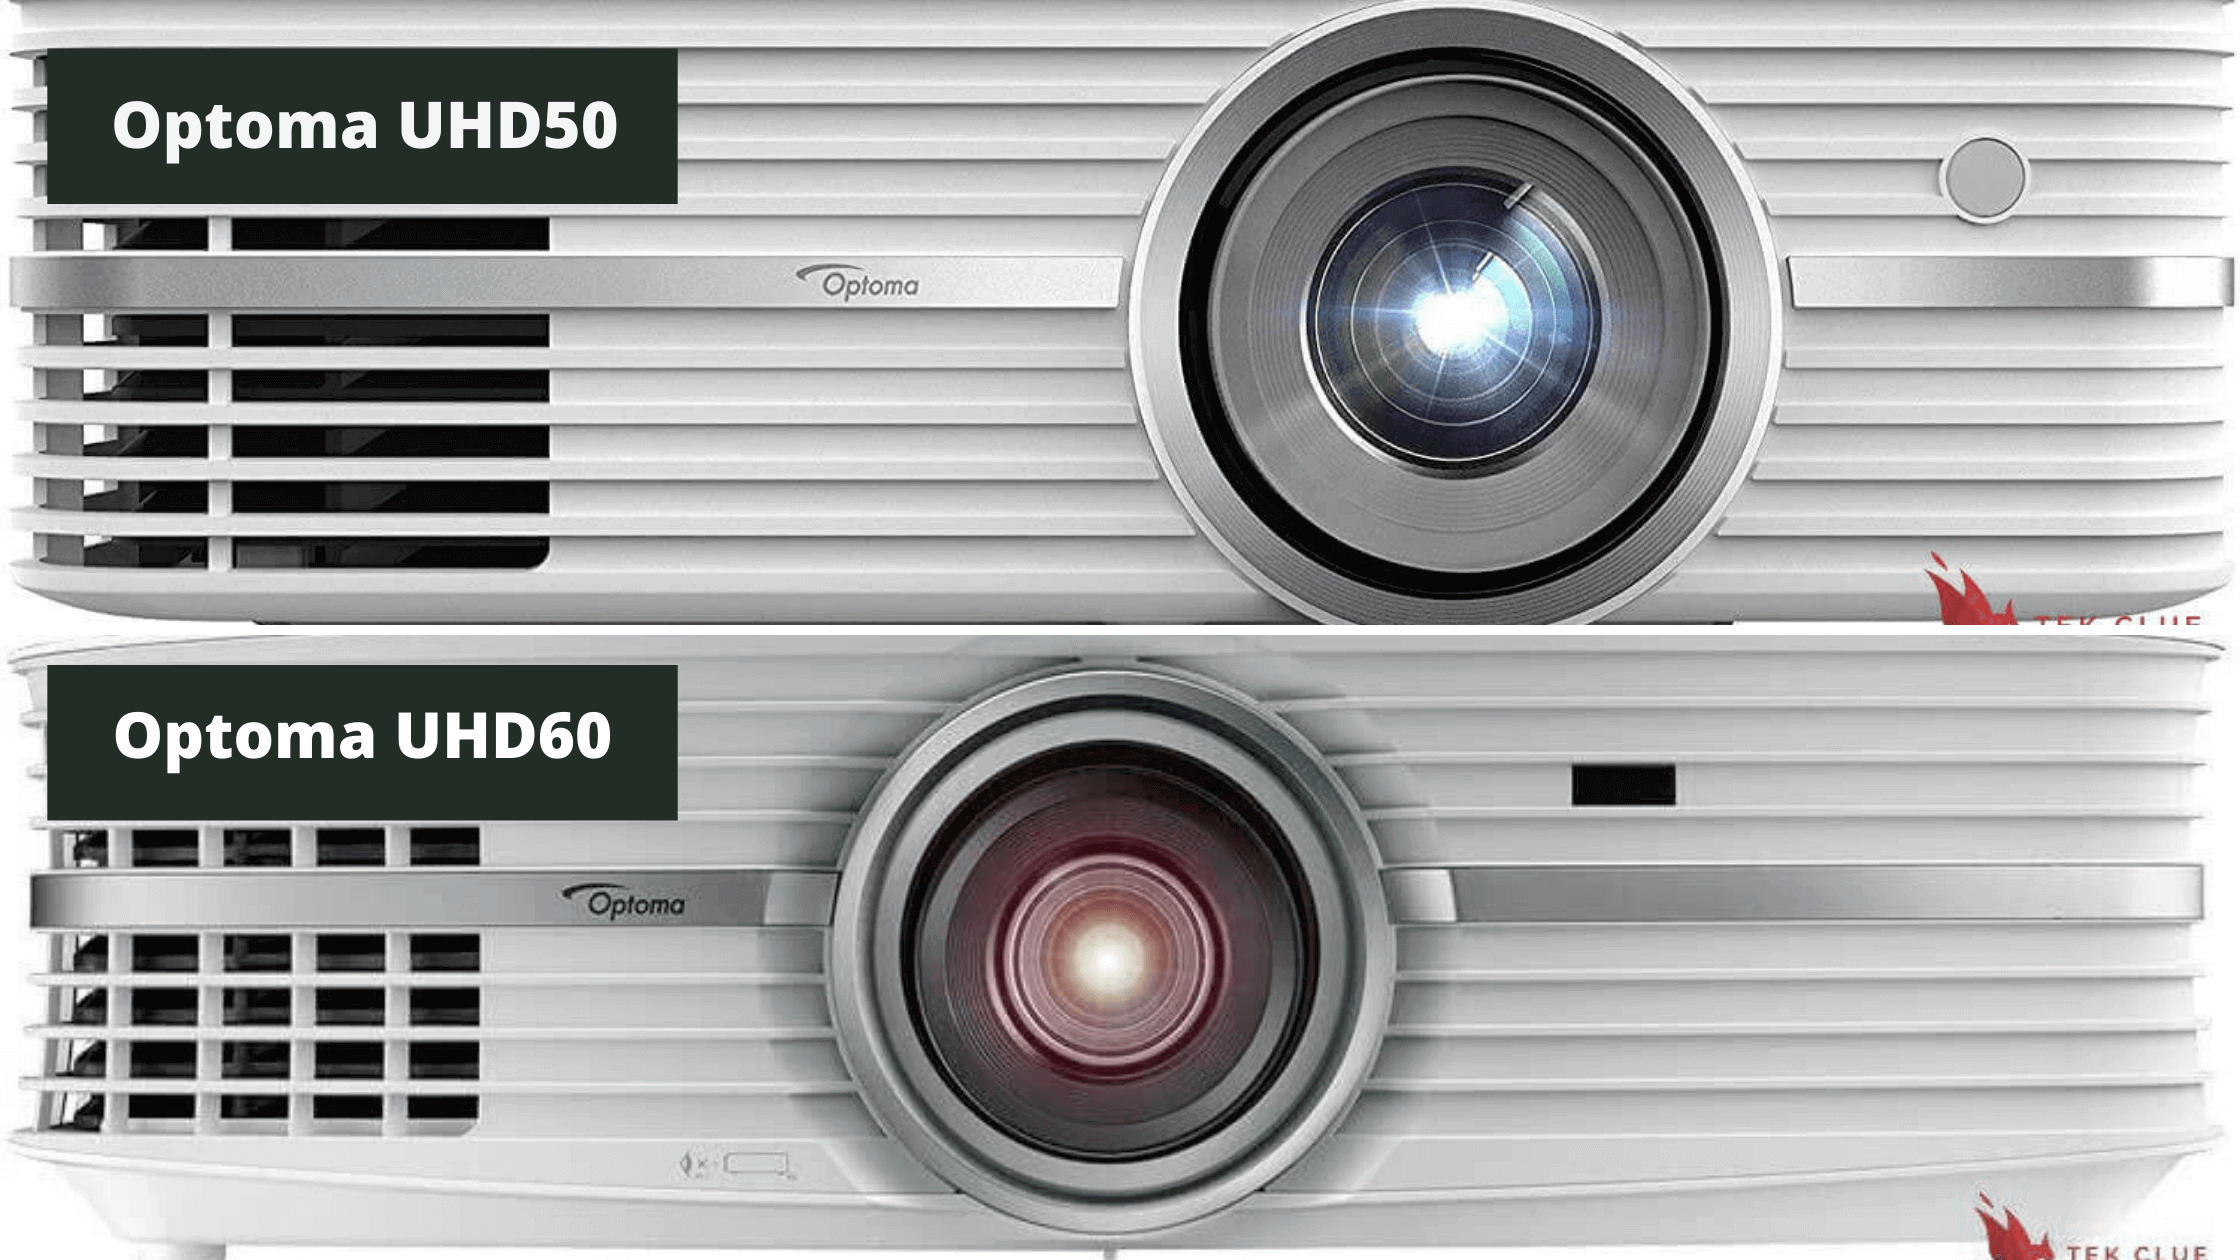 Optoma Uhd50 Vs Uhd60 Which One is the Best?